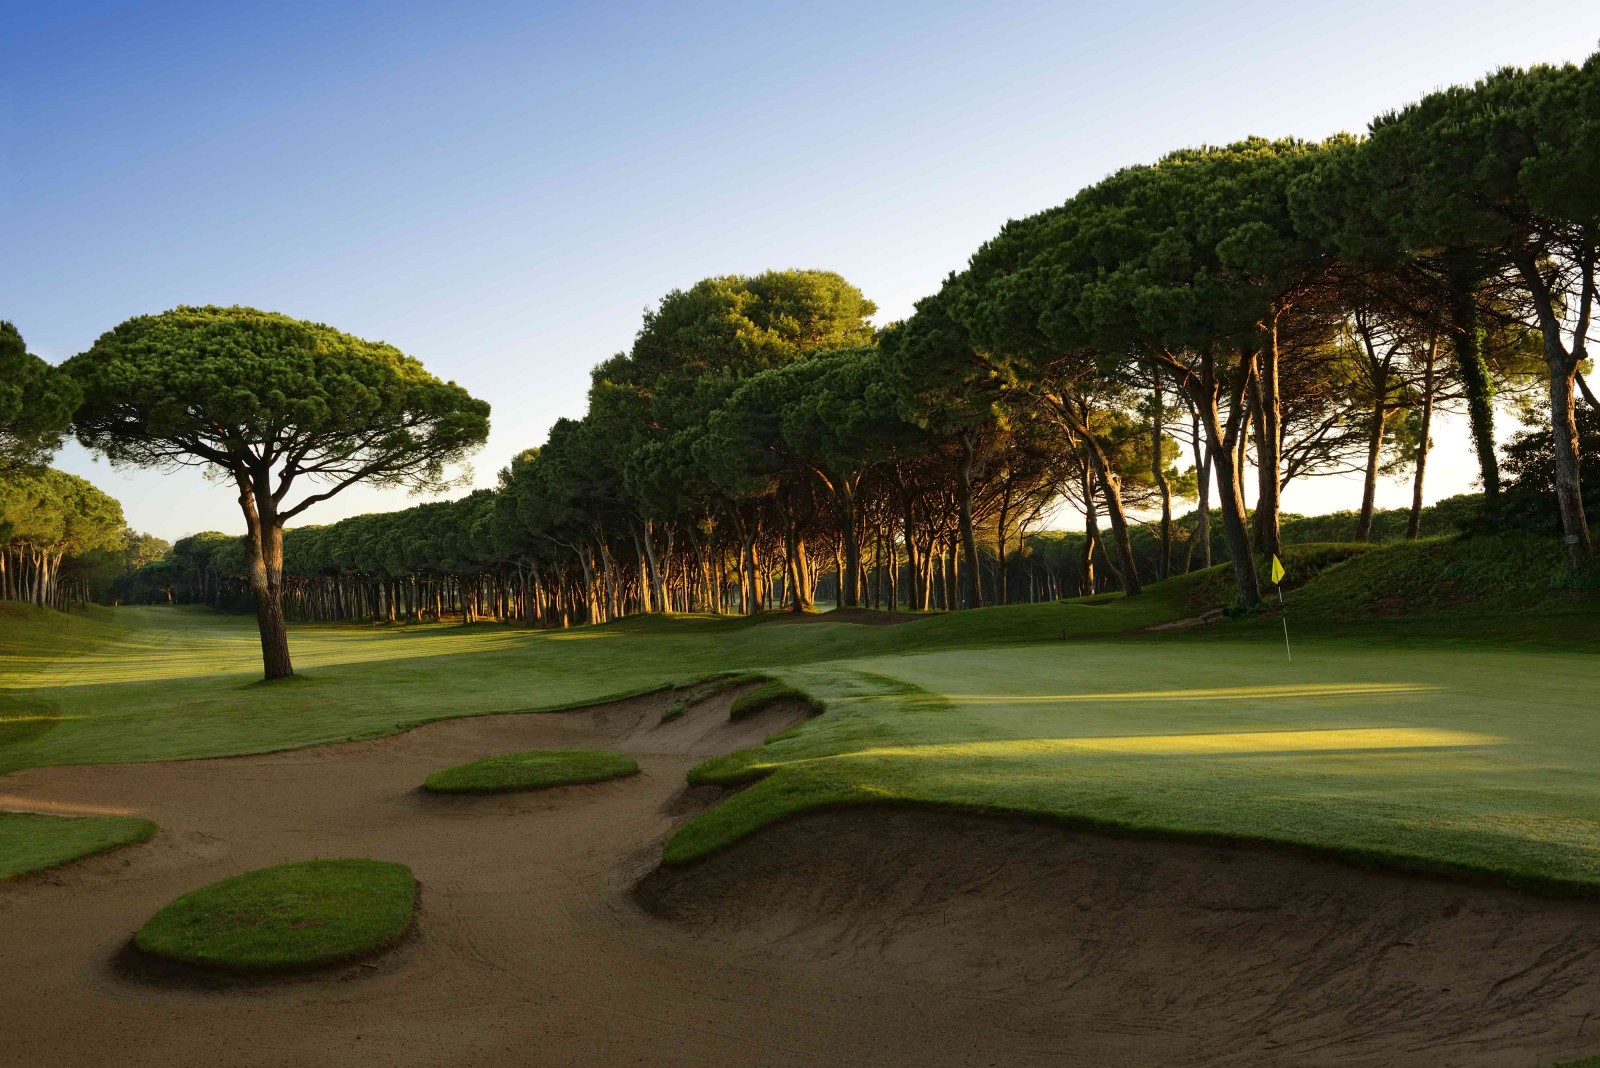 Golf de Pals features a succession of narrow, tree-lined fairways